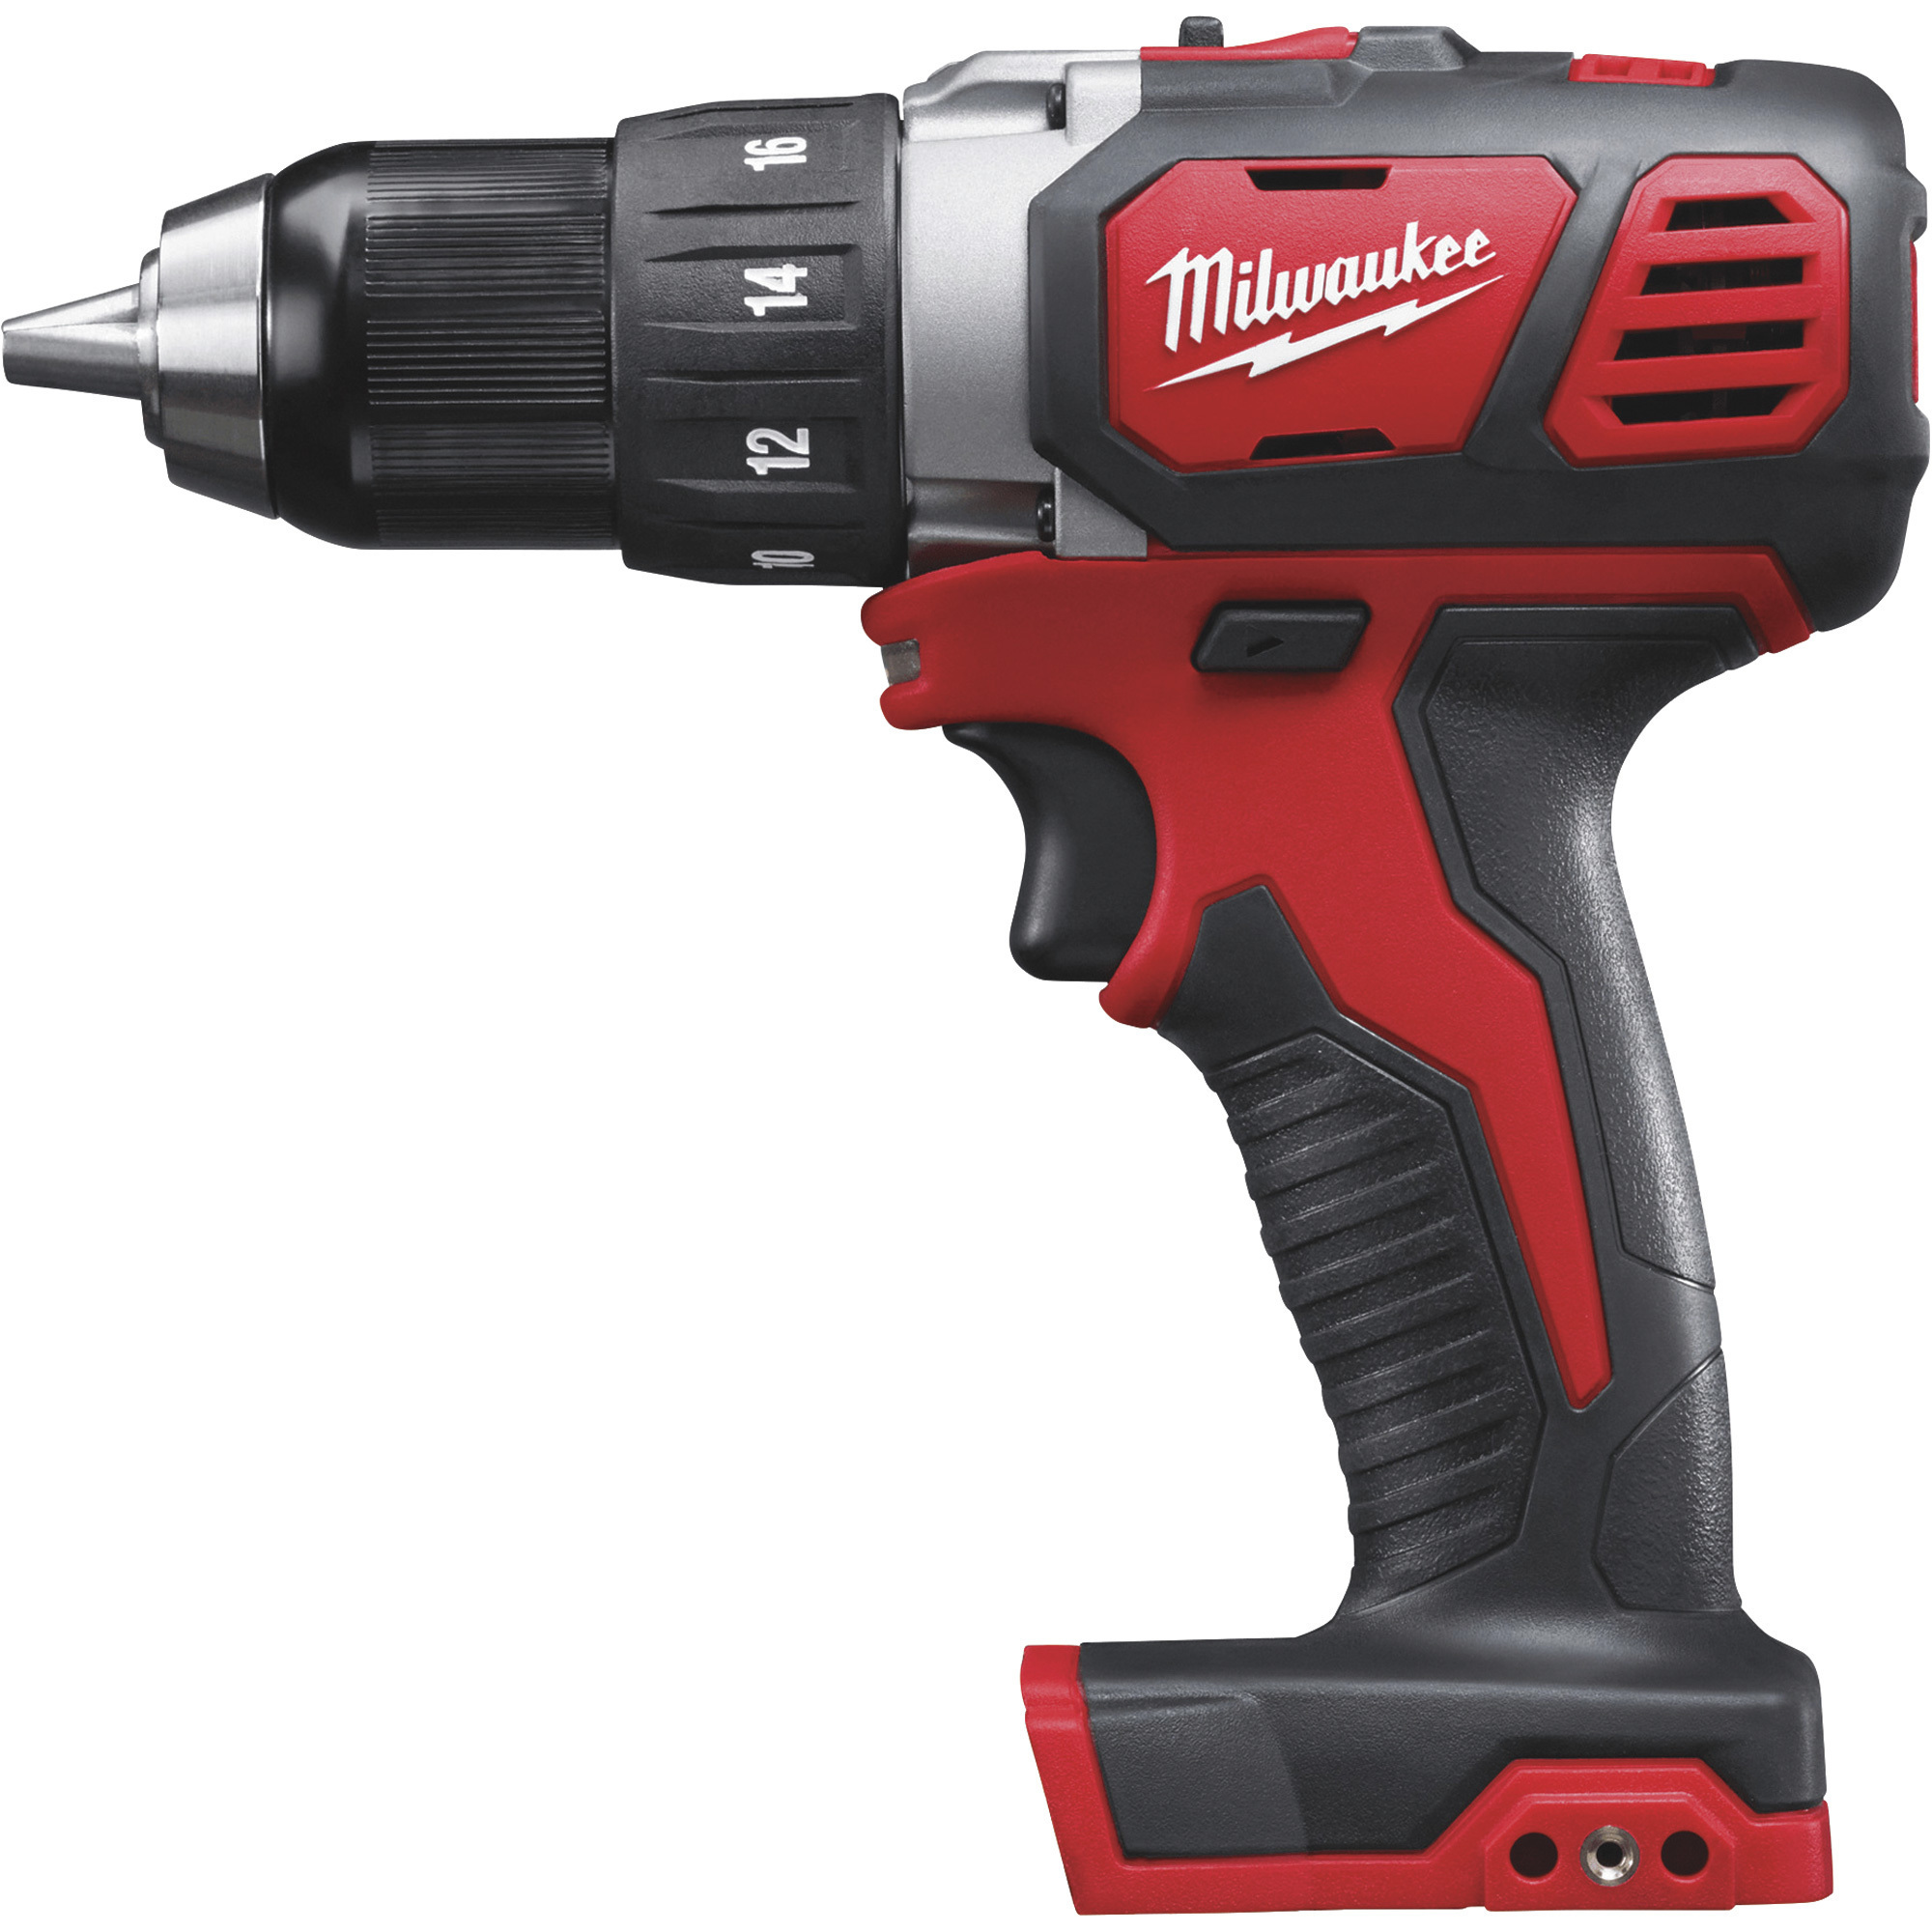 M18 Lithium-Ion Cordless Compact Electric Drill Driver — Tool Only, 1/2Inch Keyless Chuck, 500 Inch/Lbs. Torque, 1800 RPM, Model - Milwaukee 2606-20